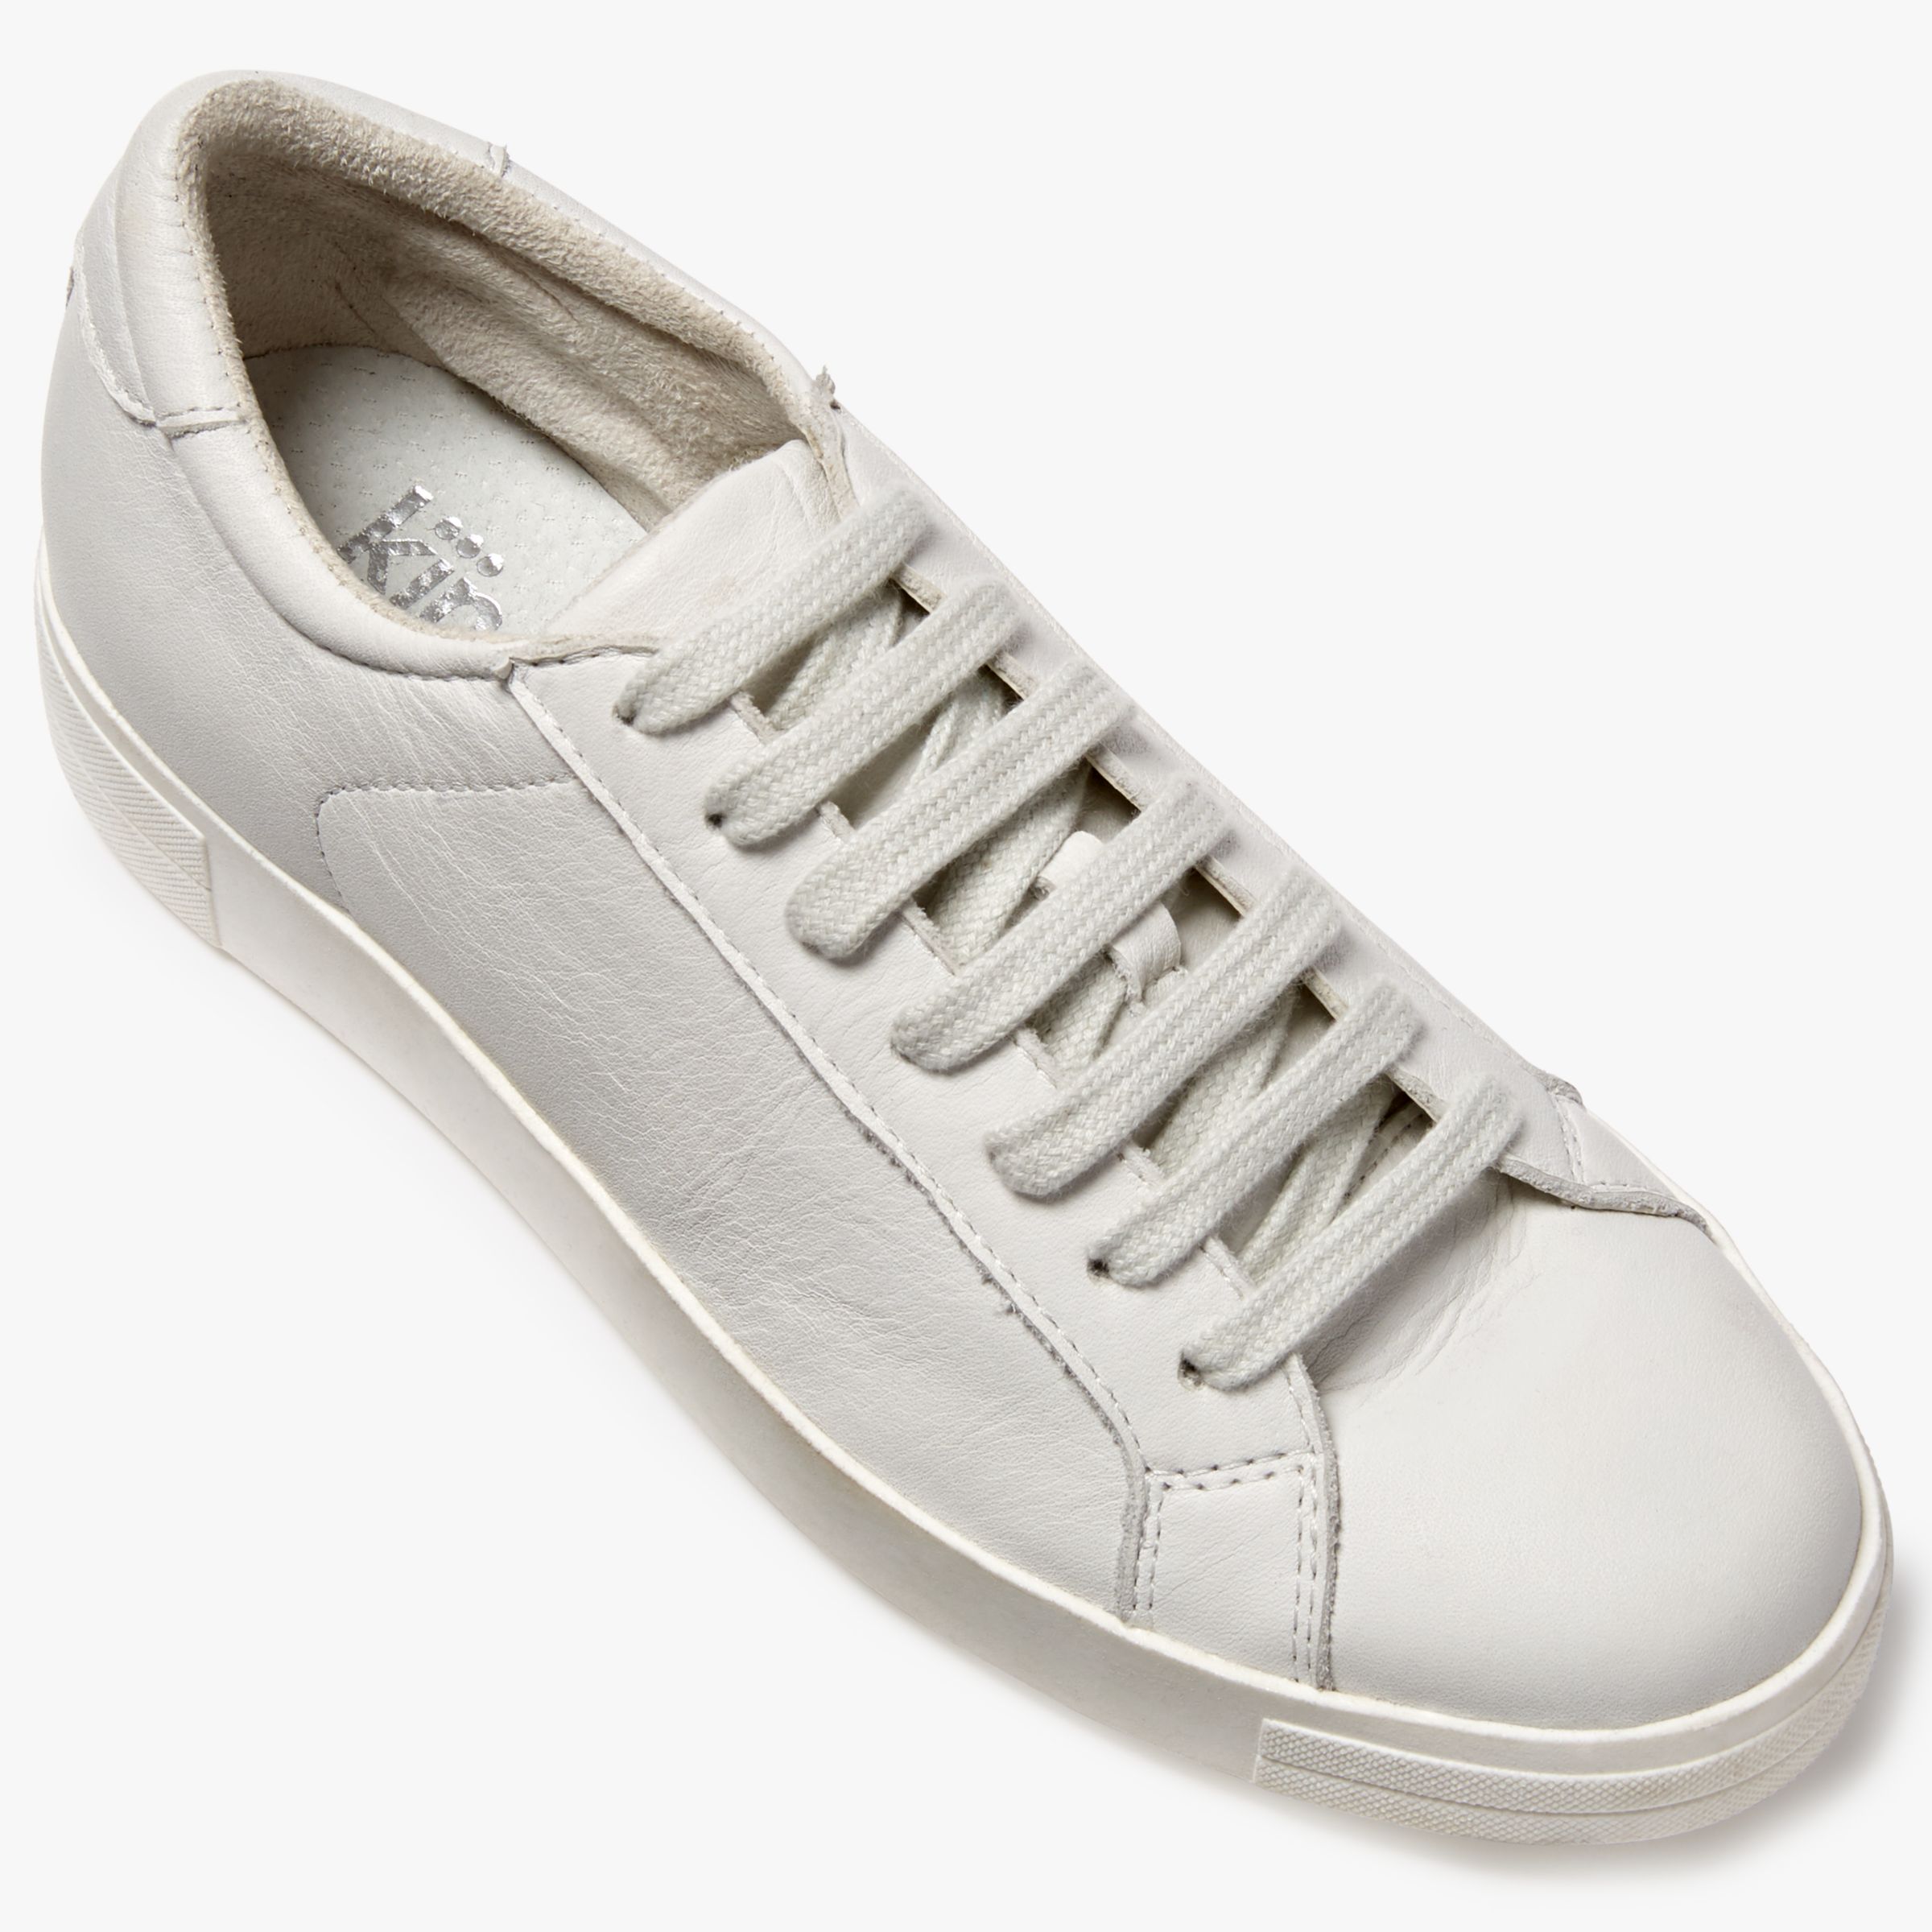 Kin Engel Lace Up Trainers, White at John Lewis & Partners